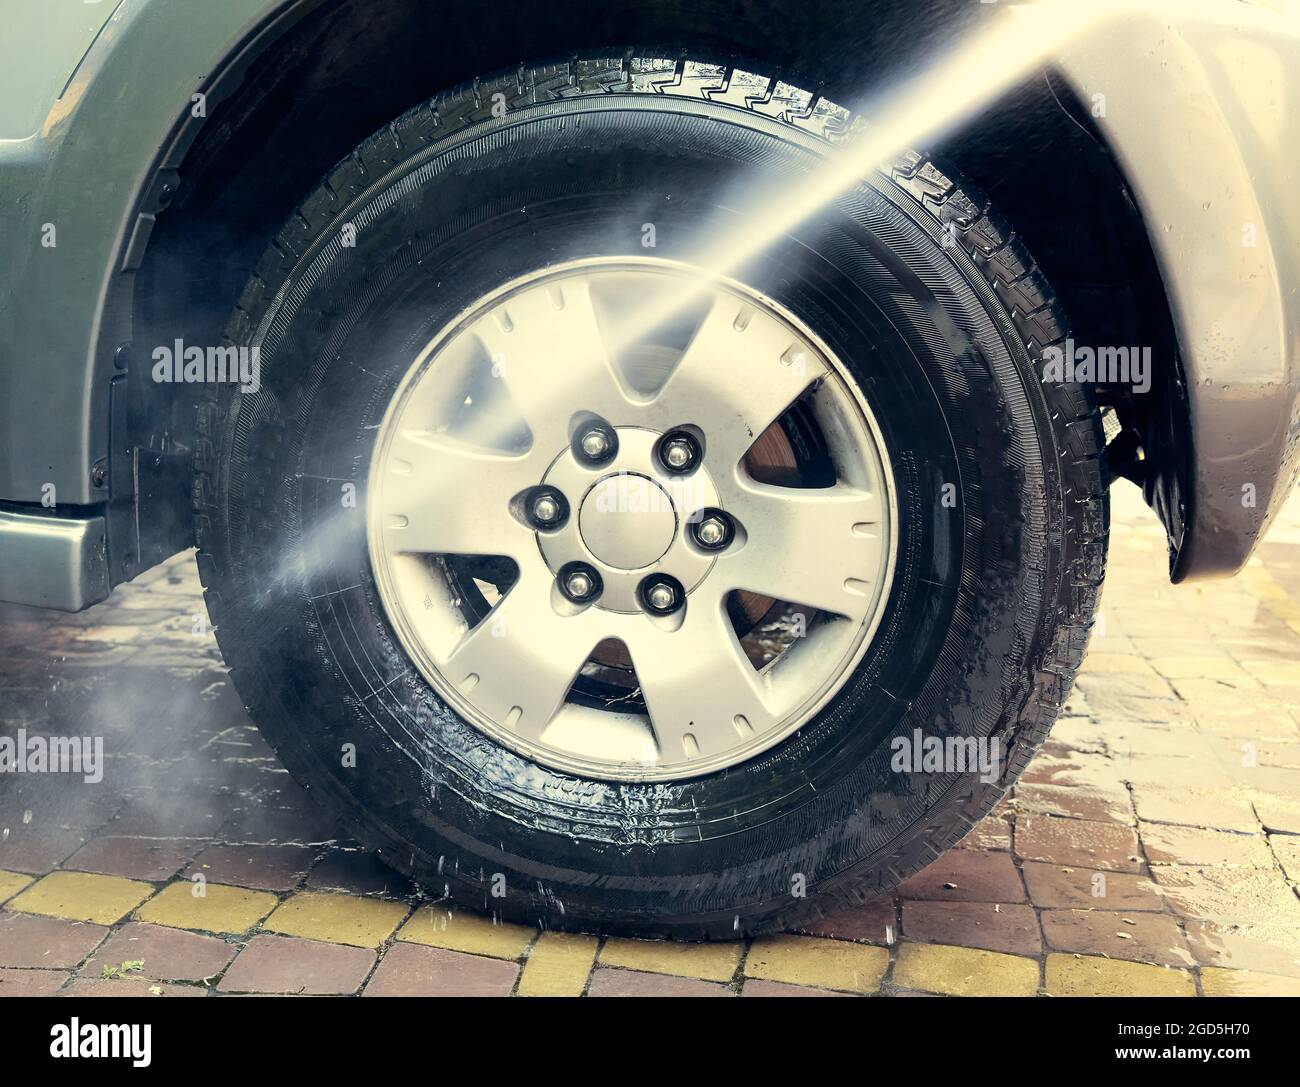 Jet washes a car wheel in the yard of  house. Odessaa Ukraine, colored, full frame, natural light. Stock Photo